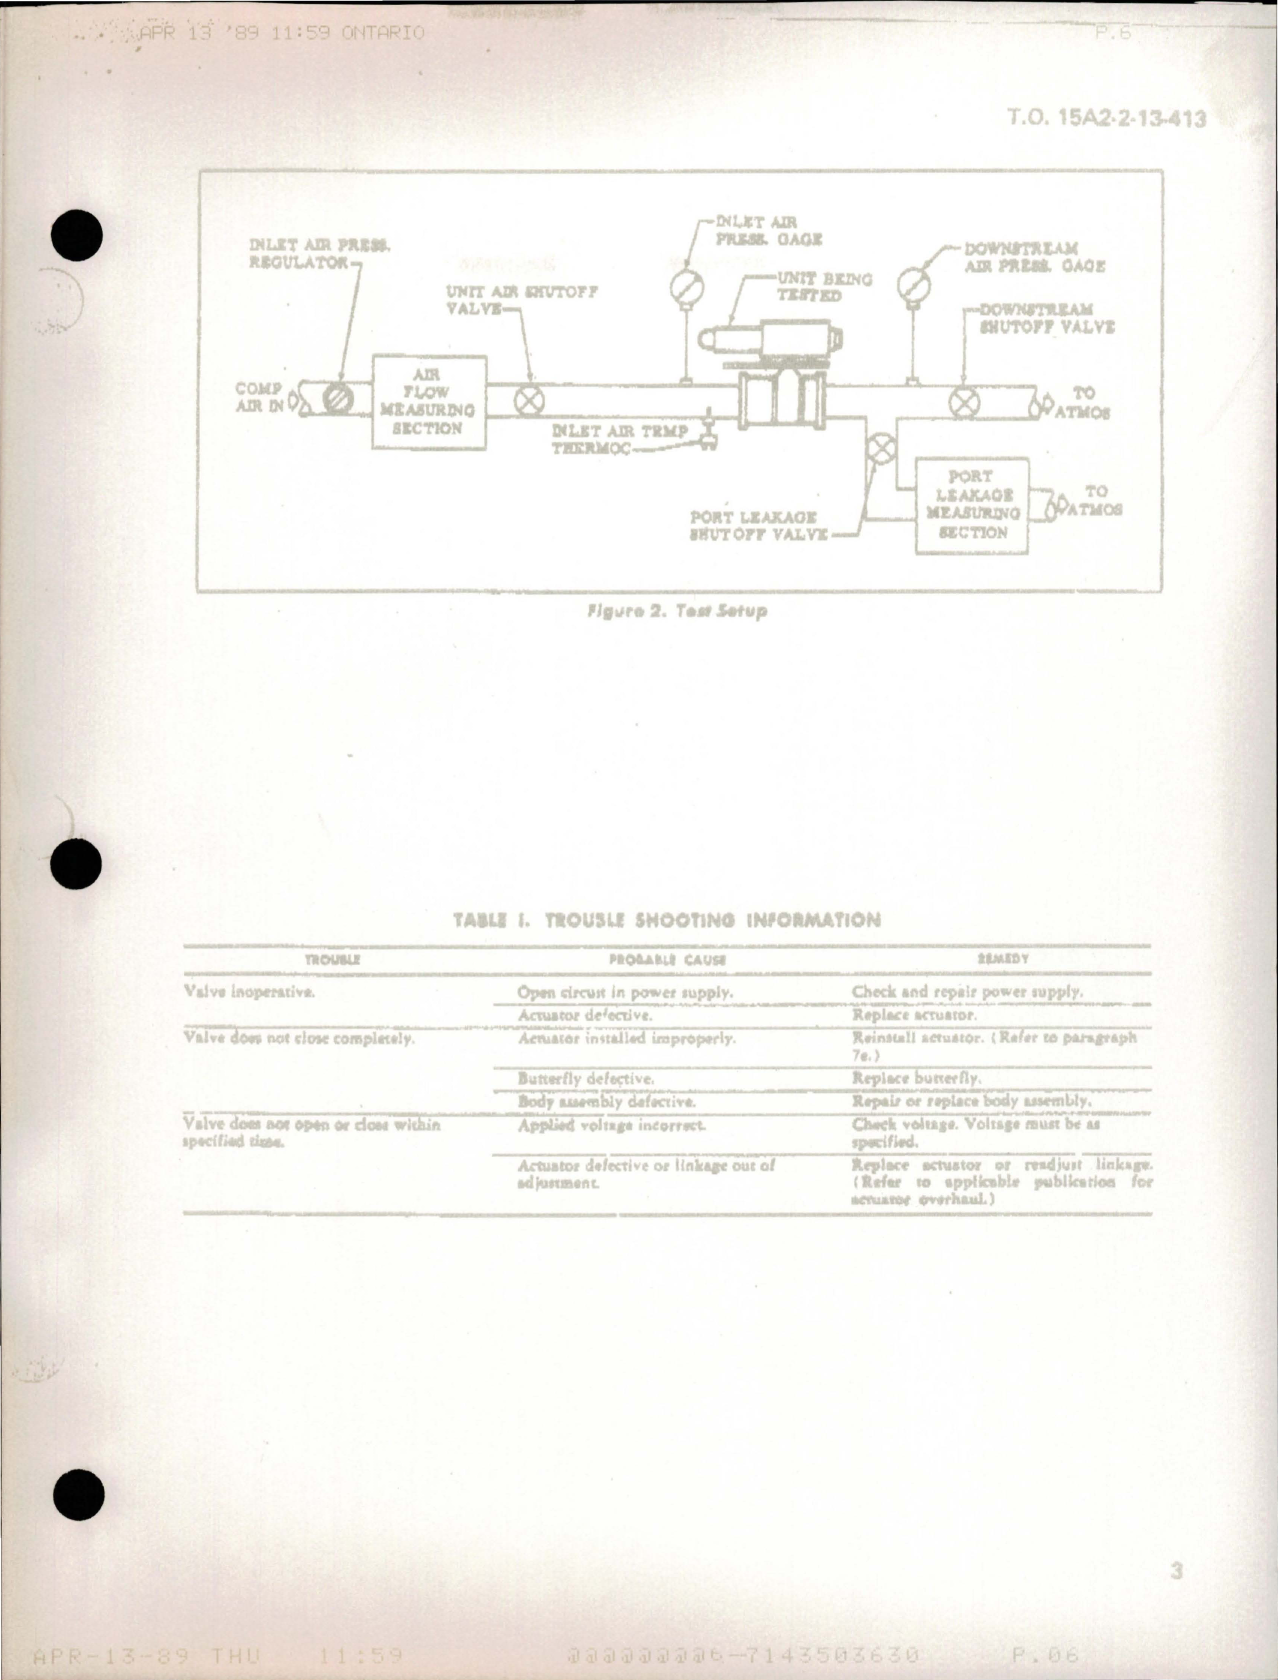 Sample page 5 from AirCorps Library document: Overhaul Instructions with Parts for One and one Half inch Diameter Electric Air Shutoff and Modulating Valve - 104366-4 - Model SVE1-157